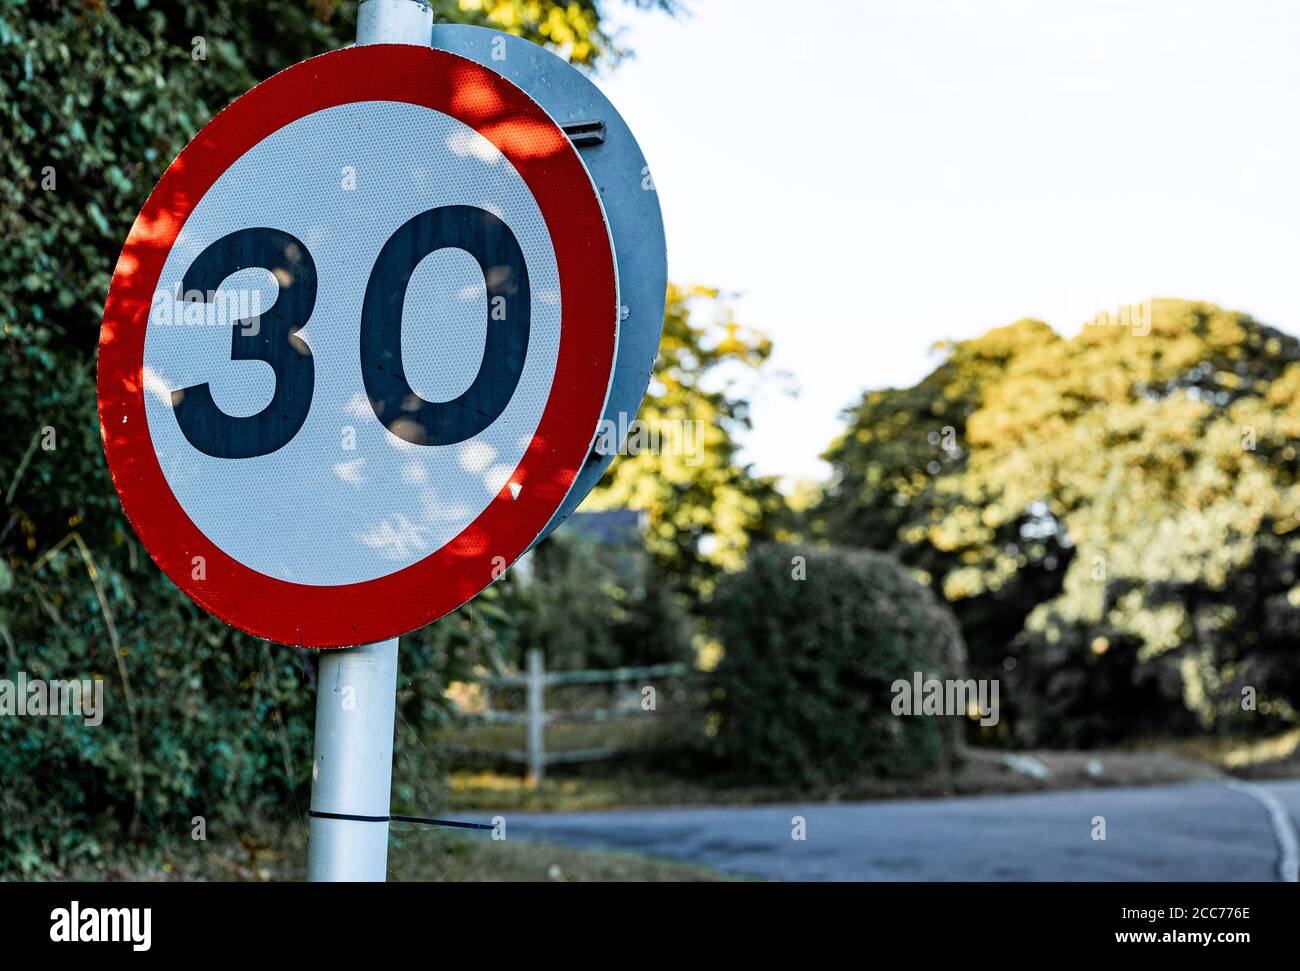 UK 30mph speed limit sign in a rural village, UK Stock Photo